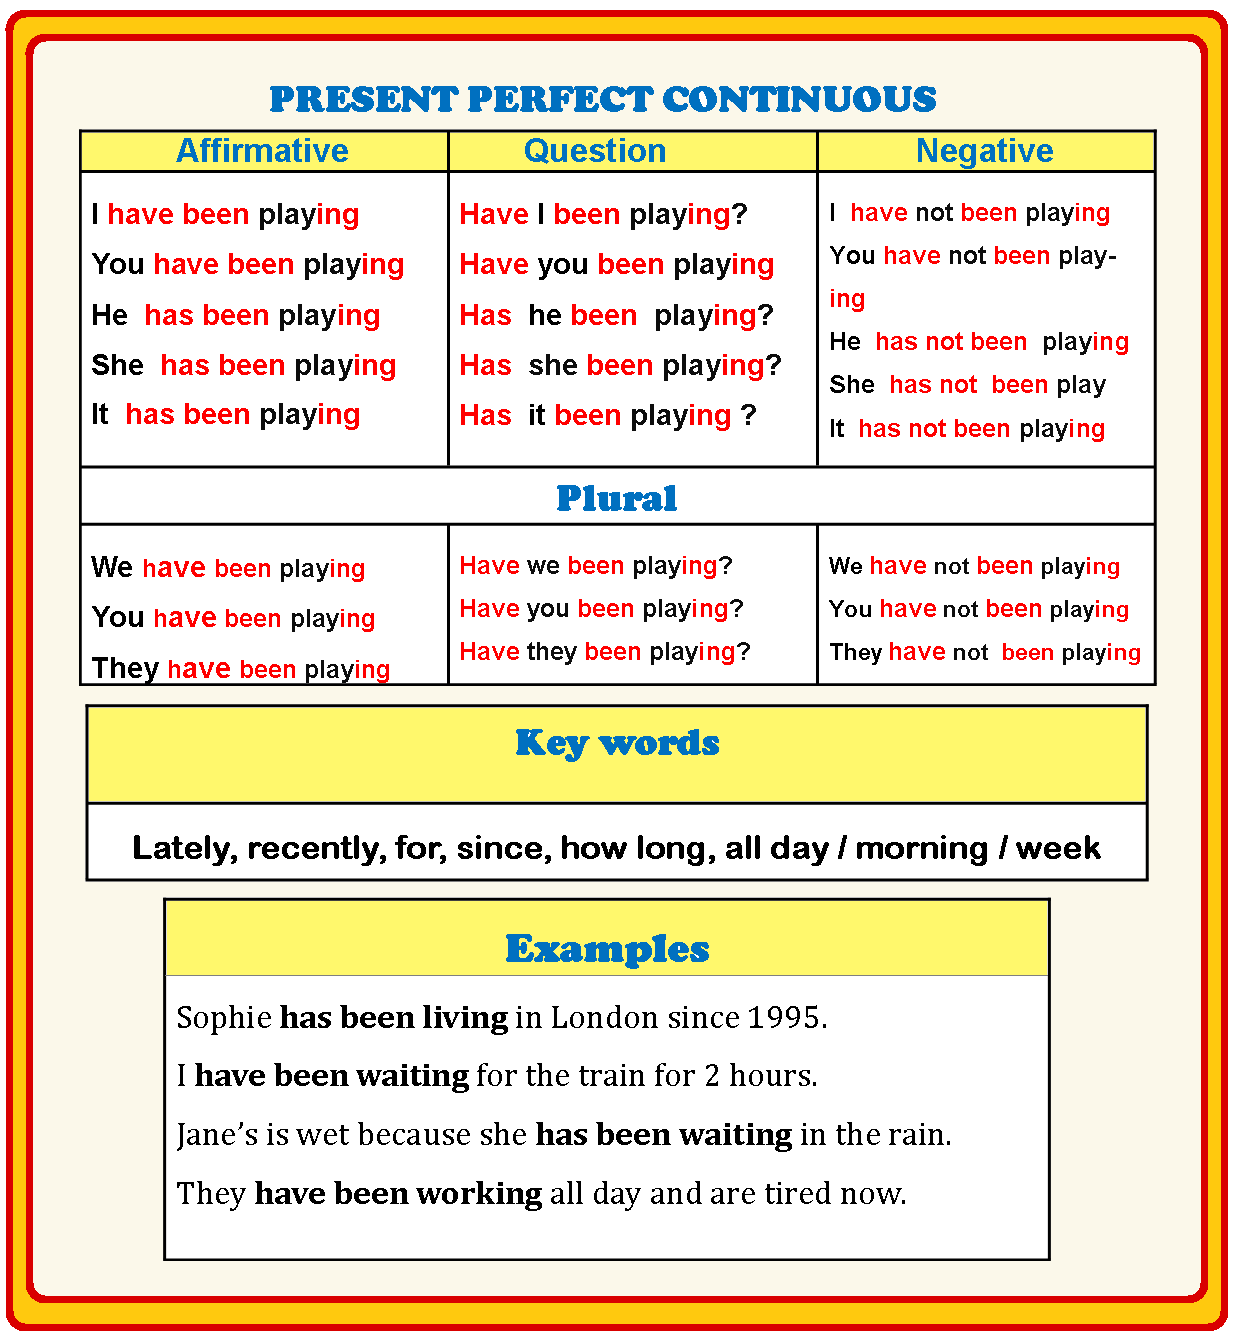 Present perfect continuous when. Правило англ яз present perfect Continuous. Present perfect Continuous образование. Как образуется perfect Continuous в английском. Have has present perfect Continuous.